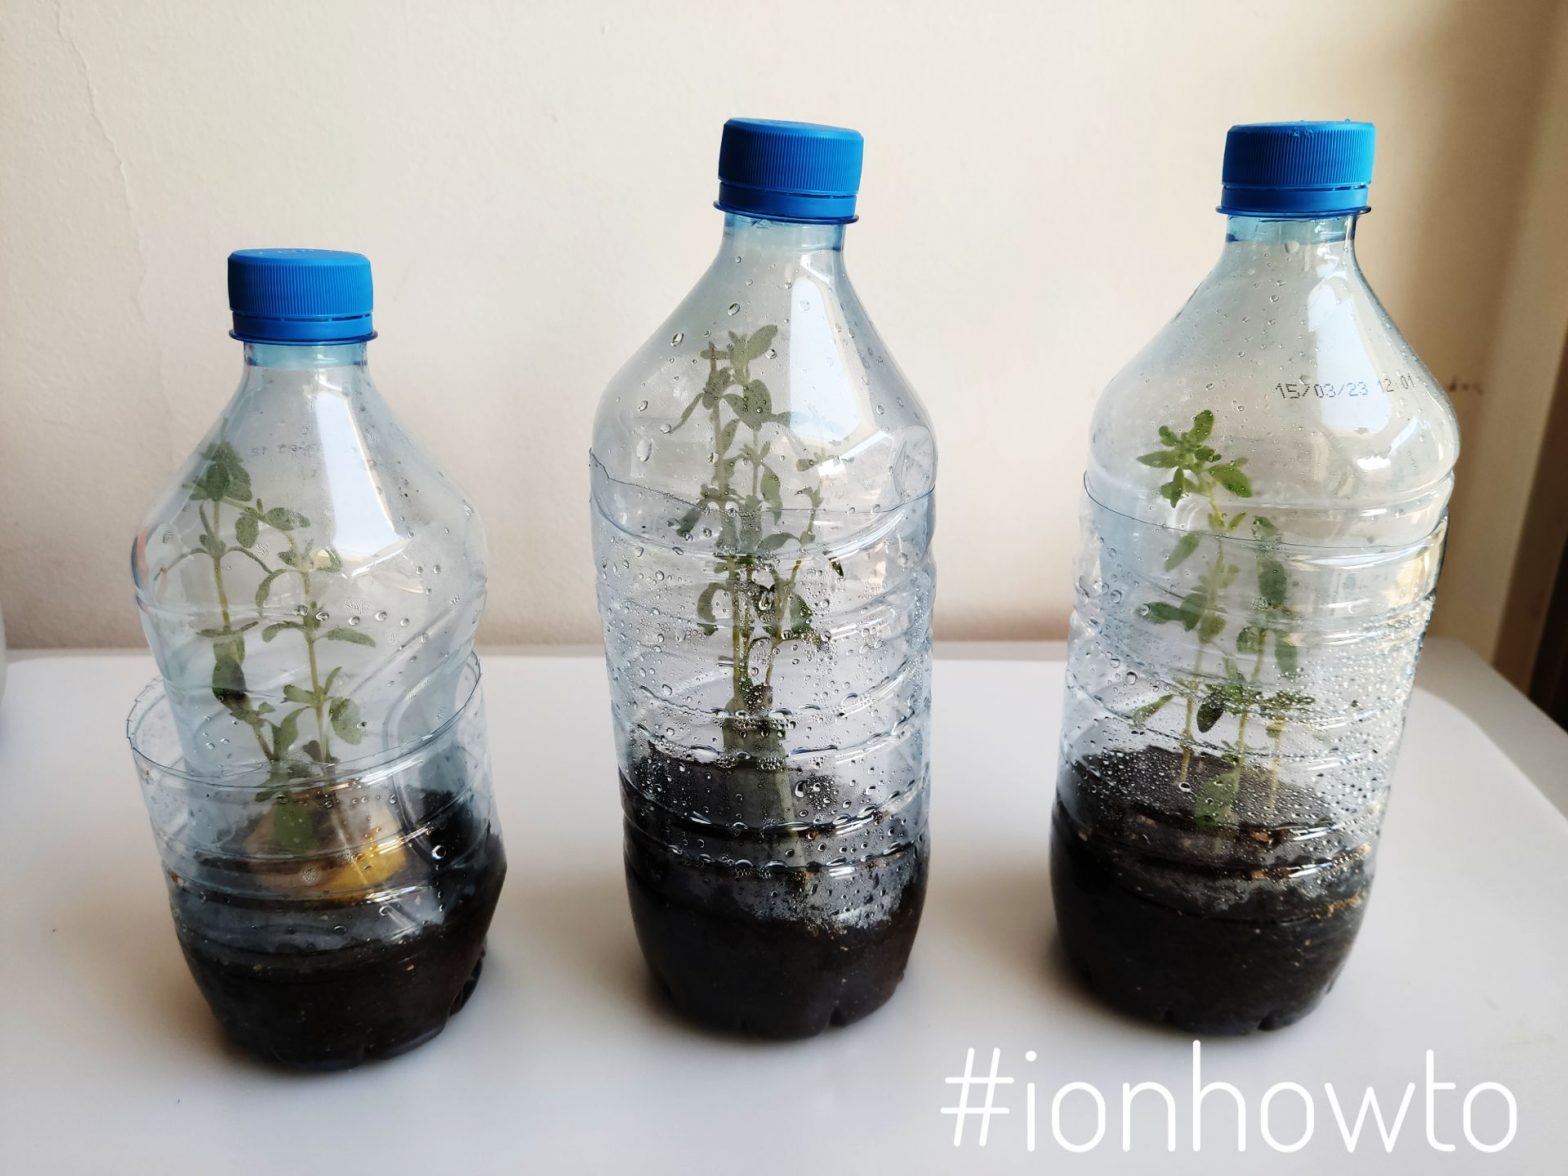 Grow herbs from cuttings in plastic bottles